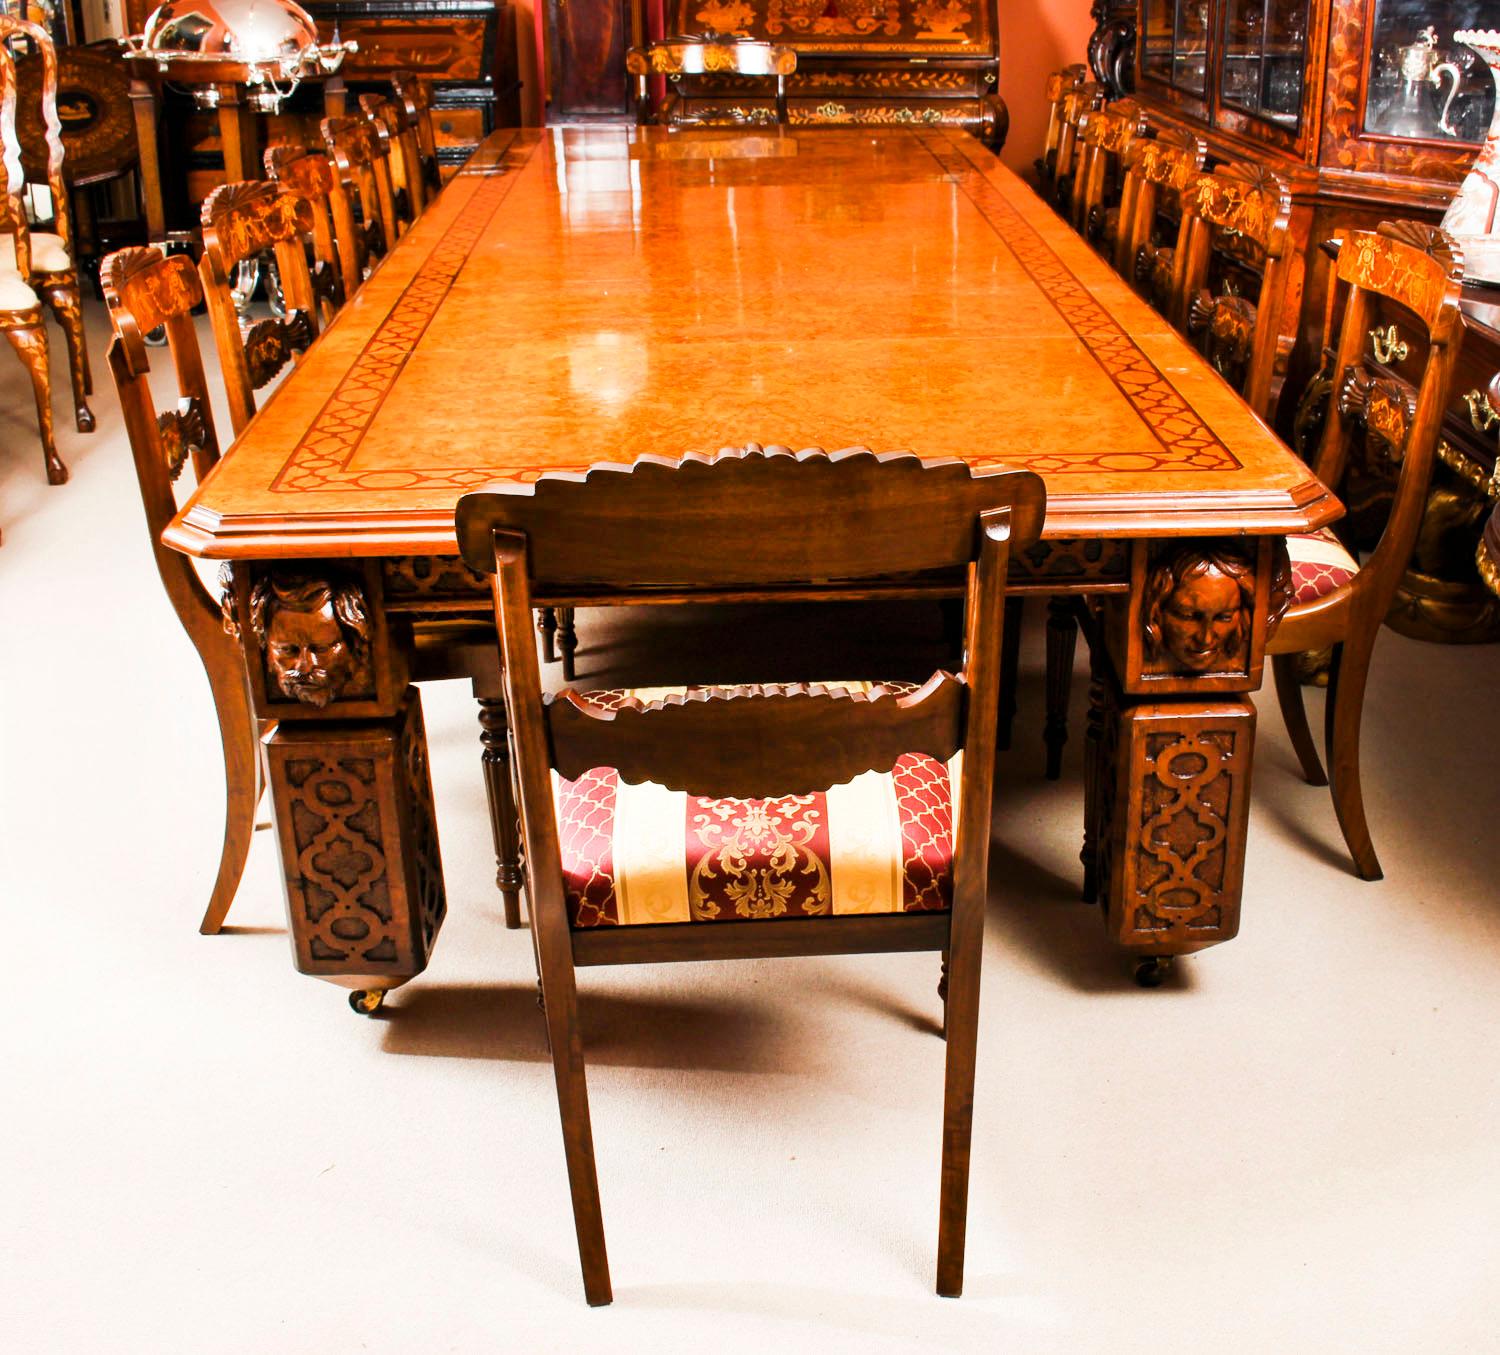 There is no mistaking the style and sophisticated design of this dining set comprising an exquisite rare English antique Elizabethan Revival pollard oak extending dining table, circa 1850 in date and a set of fourteen vintage dining chairs.

The